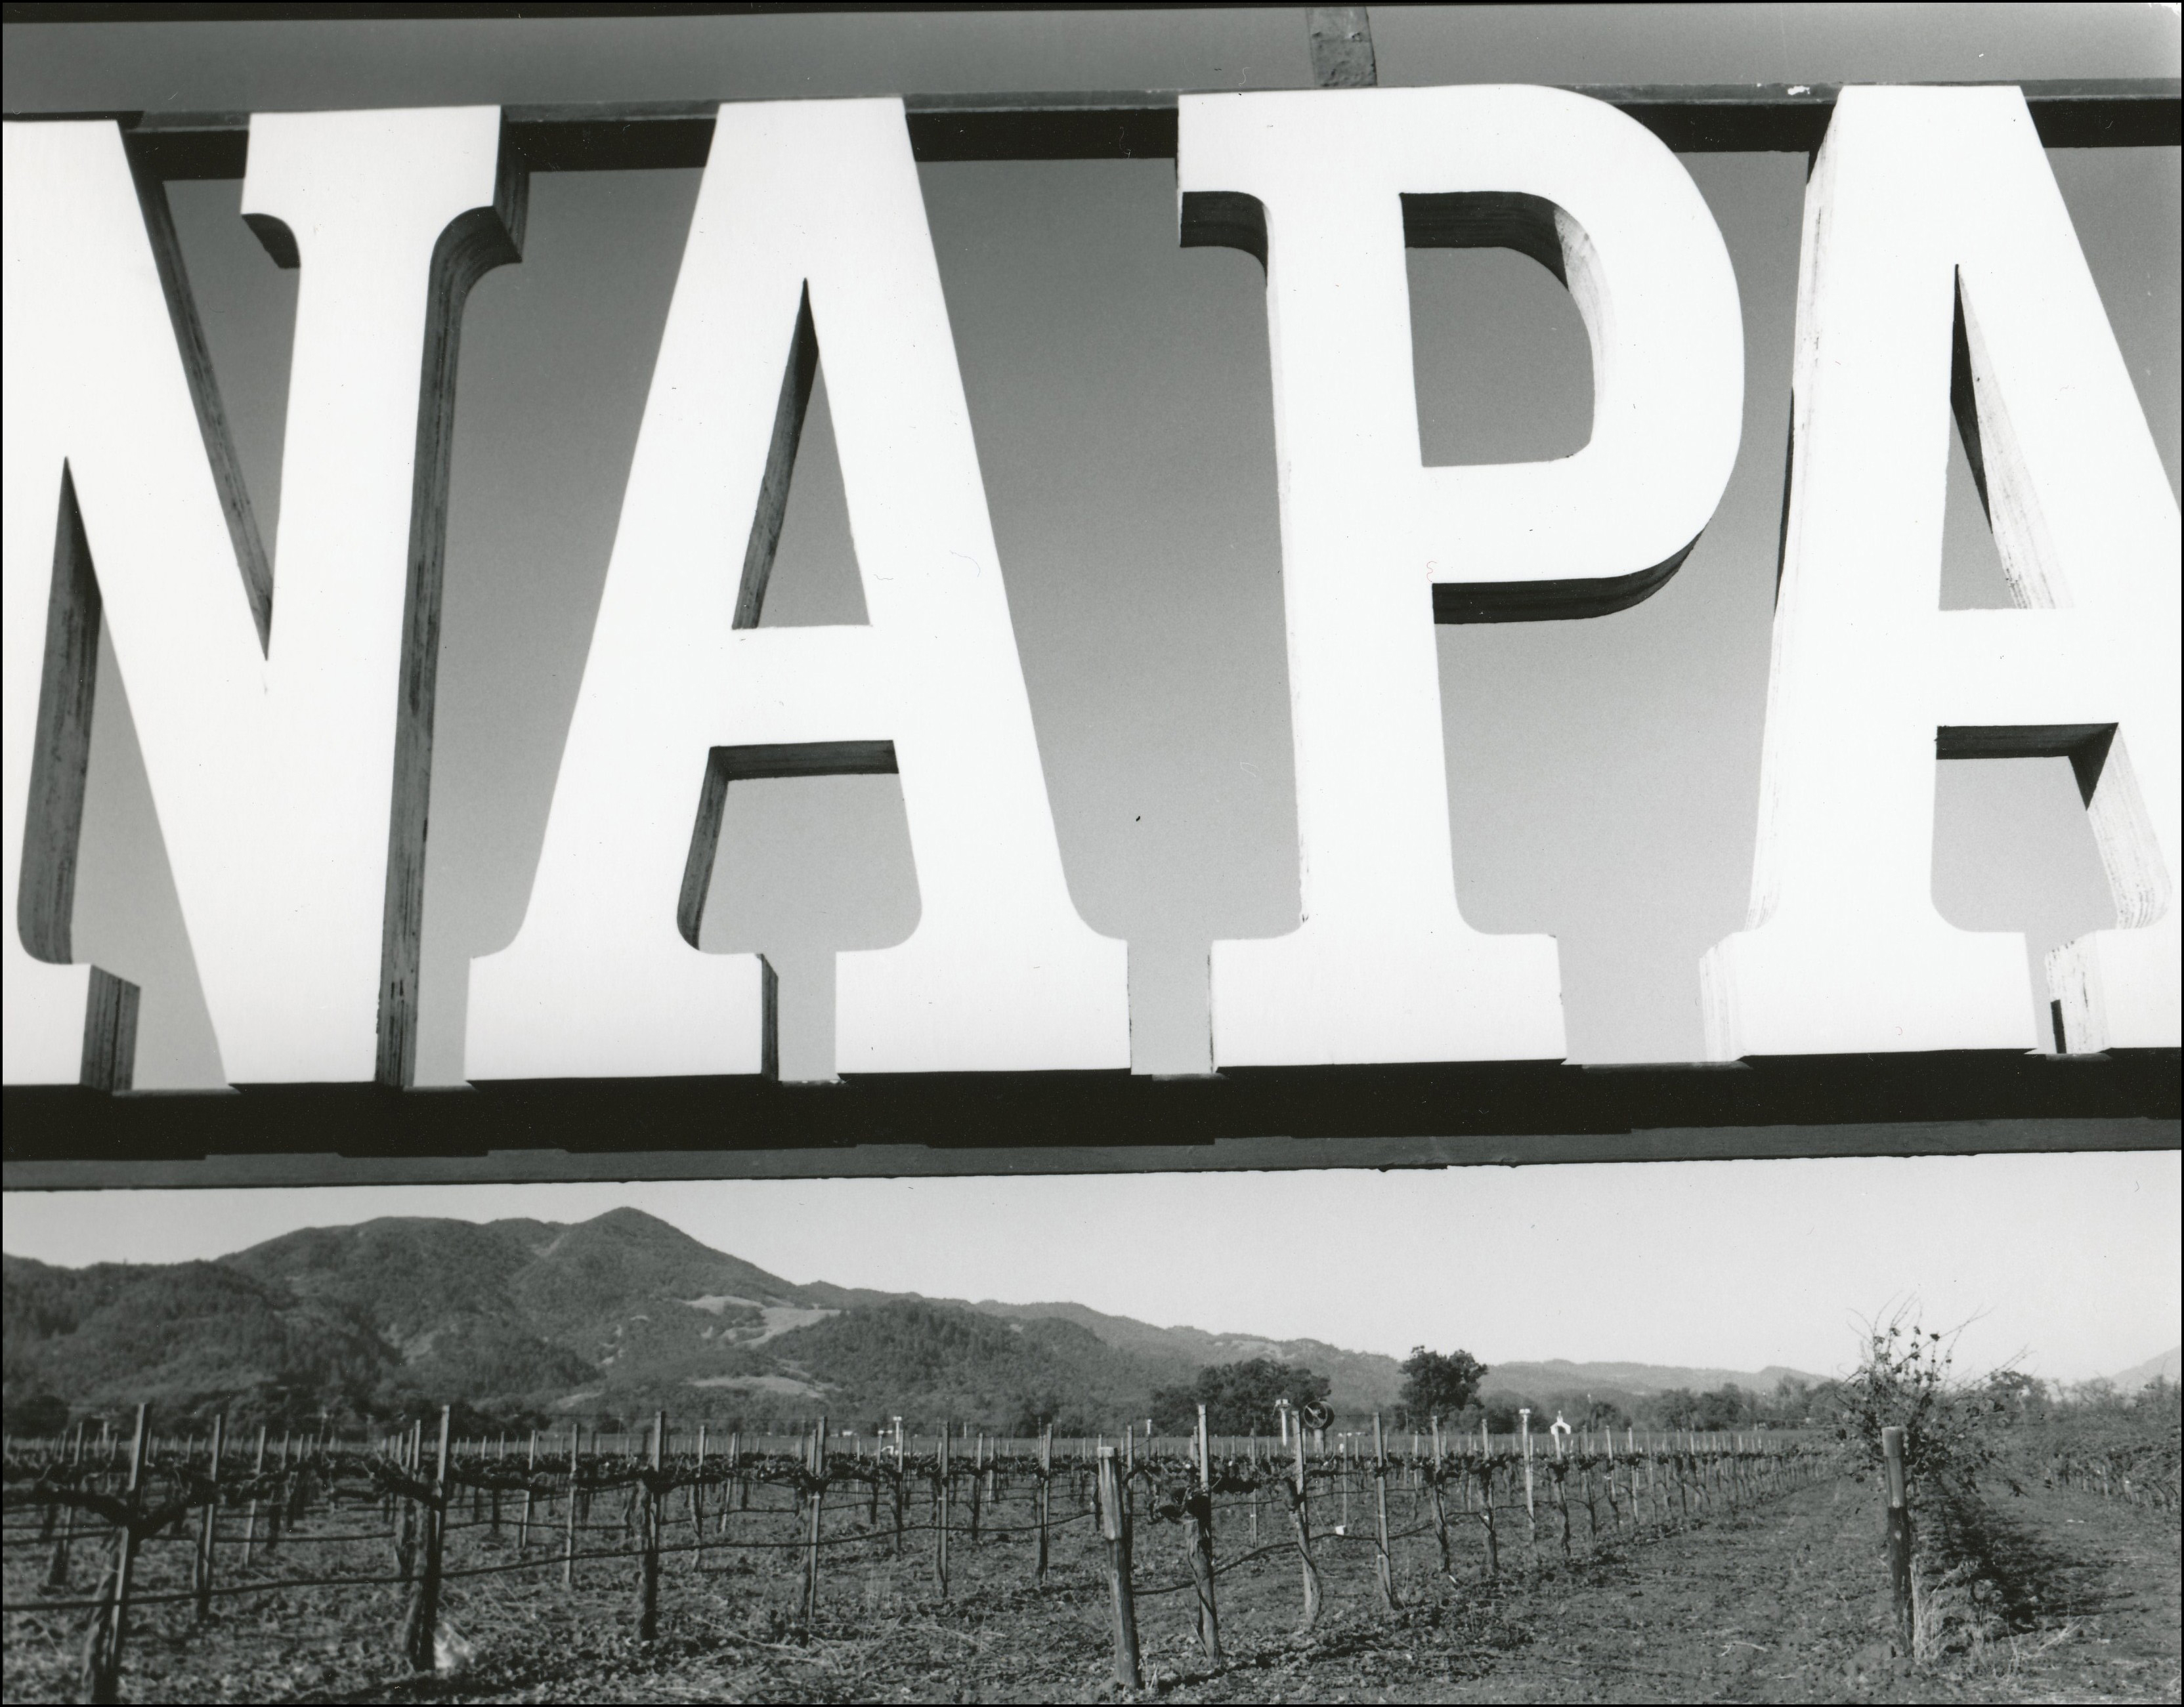 Large NAPA sign with vineyards in the background